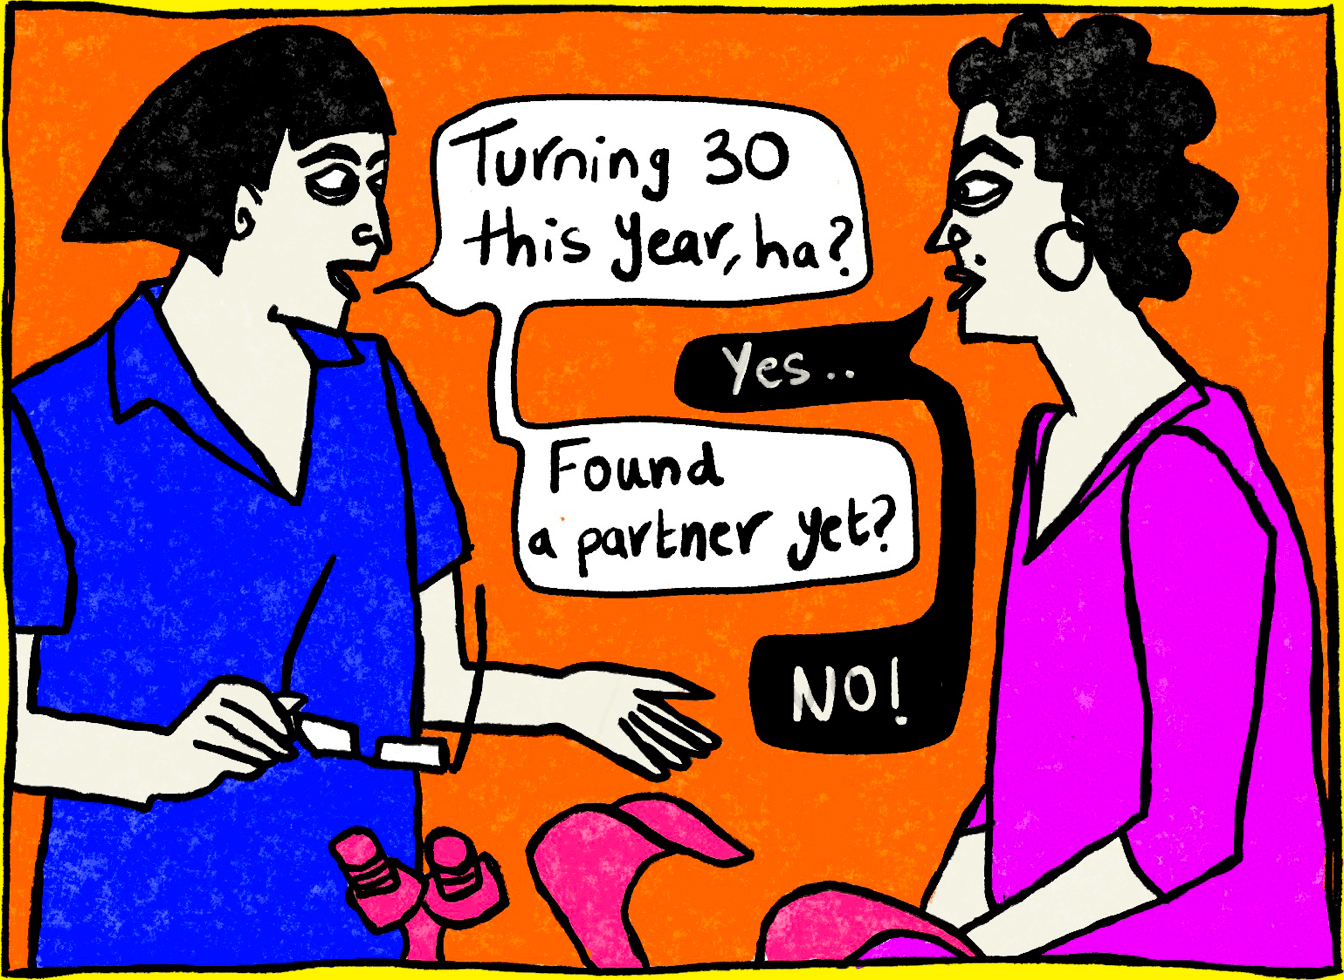 Panel one of four from Rawand Issa’s comic illustrations depicting a gynecologist checkup. Rawand and the gynecologist face each other and stand in front of an orange background with pink checkup gear in front of them. The gynecologist holds her glasses and wears the same blue scrubs. A white speech bubble is to her right that reads, “Turning 30 this year, ha?” in black. Another white speech bubble reads, “Found a partner yet?” in black. Rawand wears a pink blouse and black hoop earrings. A black speech bubble is in front of her that reads, “Yes...” in white. Another speech bubble connected reads, “No!” in black.